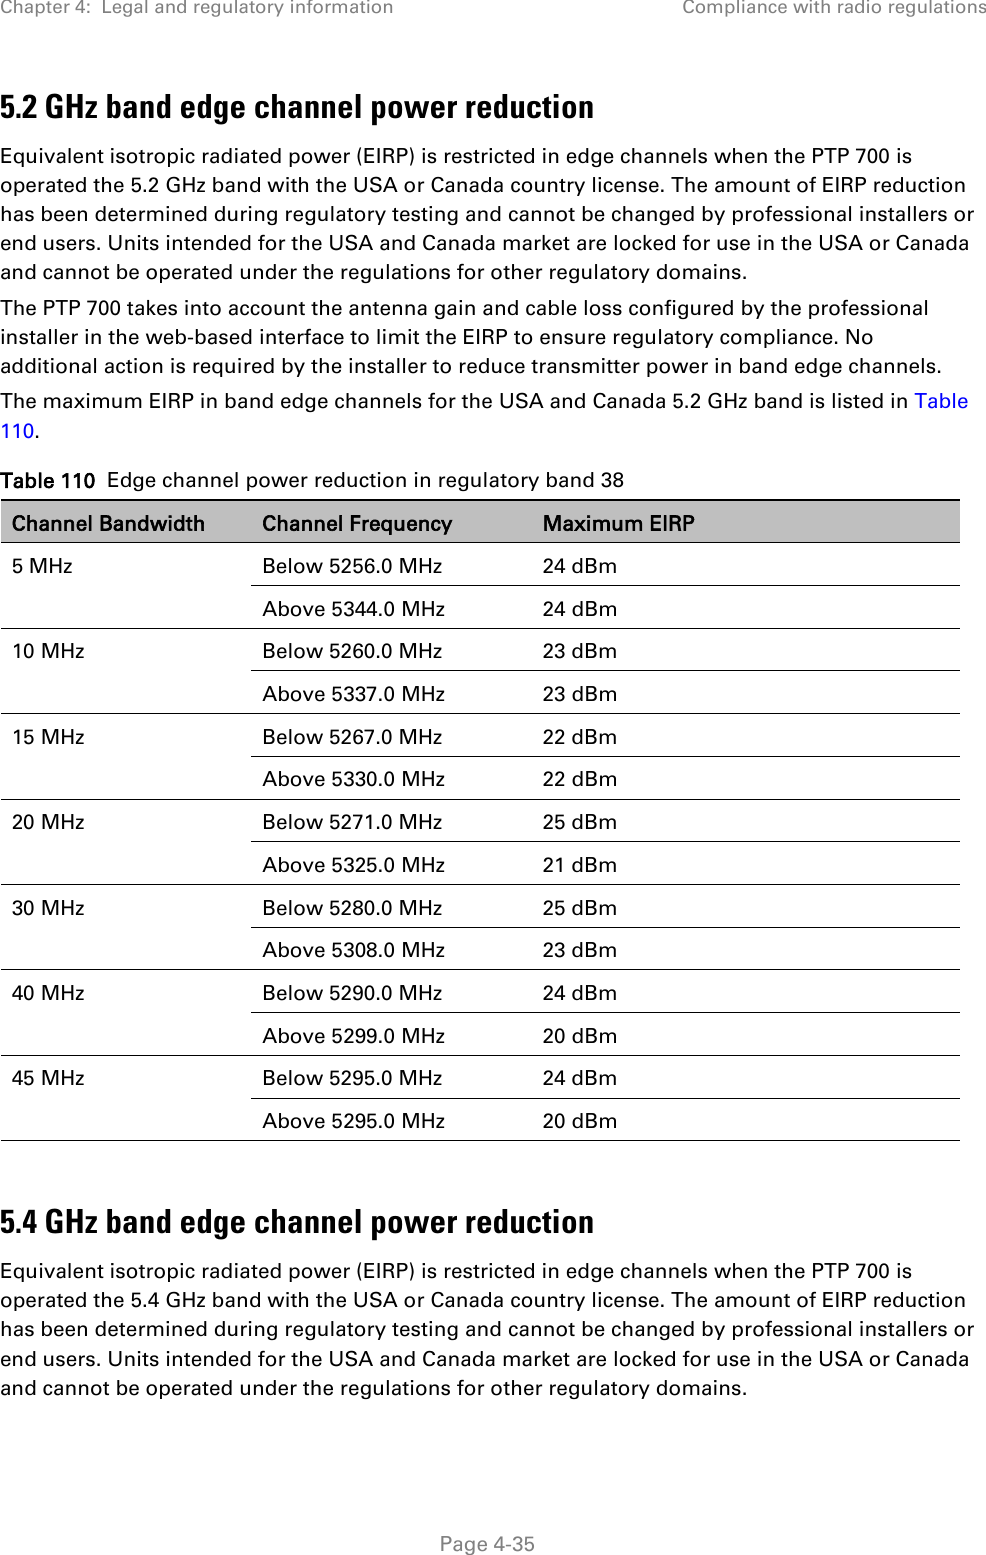 Chapter 4:  Legal and regulatory information Compliance with radio regulations  5.2 GHz band edge channel power reduction Equivalent isotropic radiated power (EIRP) is restricted in edge channels when the PTP 700 is operated the 5.2 GHz band with the USA or Canada country license. The amount of EIRP reduction has been determined during regulatory testing and cannot be changed by professional installers or end users. Units intended for the USA and Canada market are locked for use in the USA or Canada and cannot be operated under the regulations for other regulatory domains. The PTP 700 takes into account the antenna gain and cable loss configured by the professional installer in the web-based interface to limit the EIRP to ensure regulatory compliance. No additional action is required by the installer to reduce transmitter power in band edge channels. The maximum EIRP in band edge channels for the USA and Canada 5.2 GHz band is listed in Table 110. Table 110  Edge channel power reduction in regulatory band 38 Channel Bandwidth Channel Frequency Maximum EIRP 5 MHz Below 5256.0 MHz 24 dBm Above 5344.0 MHz 24 dBm 10 MHz Below 5260.0 MHz 23 dBm Above 5337.0 MHz 23 dBm 15 MHz Below 5267.0 MHz 22 dBm Above 5330.0 MHz 22 dBm 20 MHz Below 5271.0 MHz 25 dBm Above 5325.0 MHz  21 dBm 30 MHz Below 5280.0 MHz 25 dBm Above 5308.0 MHz  23 dBm 40 MHz Below 5290.0 MHz  24 dBm Above 5299.0 MHz 20 dBm 45 MHz Below 5295.0 MHz 24 dBm Above 5295.0 MHz 20 dBm  5.4 GHz band edge channel power reduction Equivalent isotropic radiated power (EIRP) is restricted in edge channels when the PTP 700 is operated the 5.4 GHz band with the USA or Canada country license. The amount of EIRP reduction has been determined during regulatory testing and cannot be changed by professional installers or end users. Units intended for the USA and Canada market are locked for use in the USA or Canada and cannot be operated under the regulations for other regulatory domains.  Page 4-35 